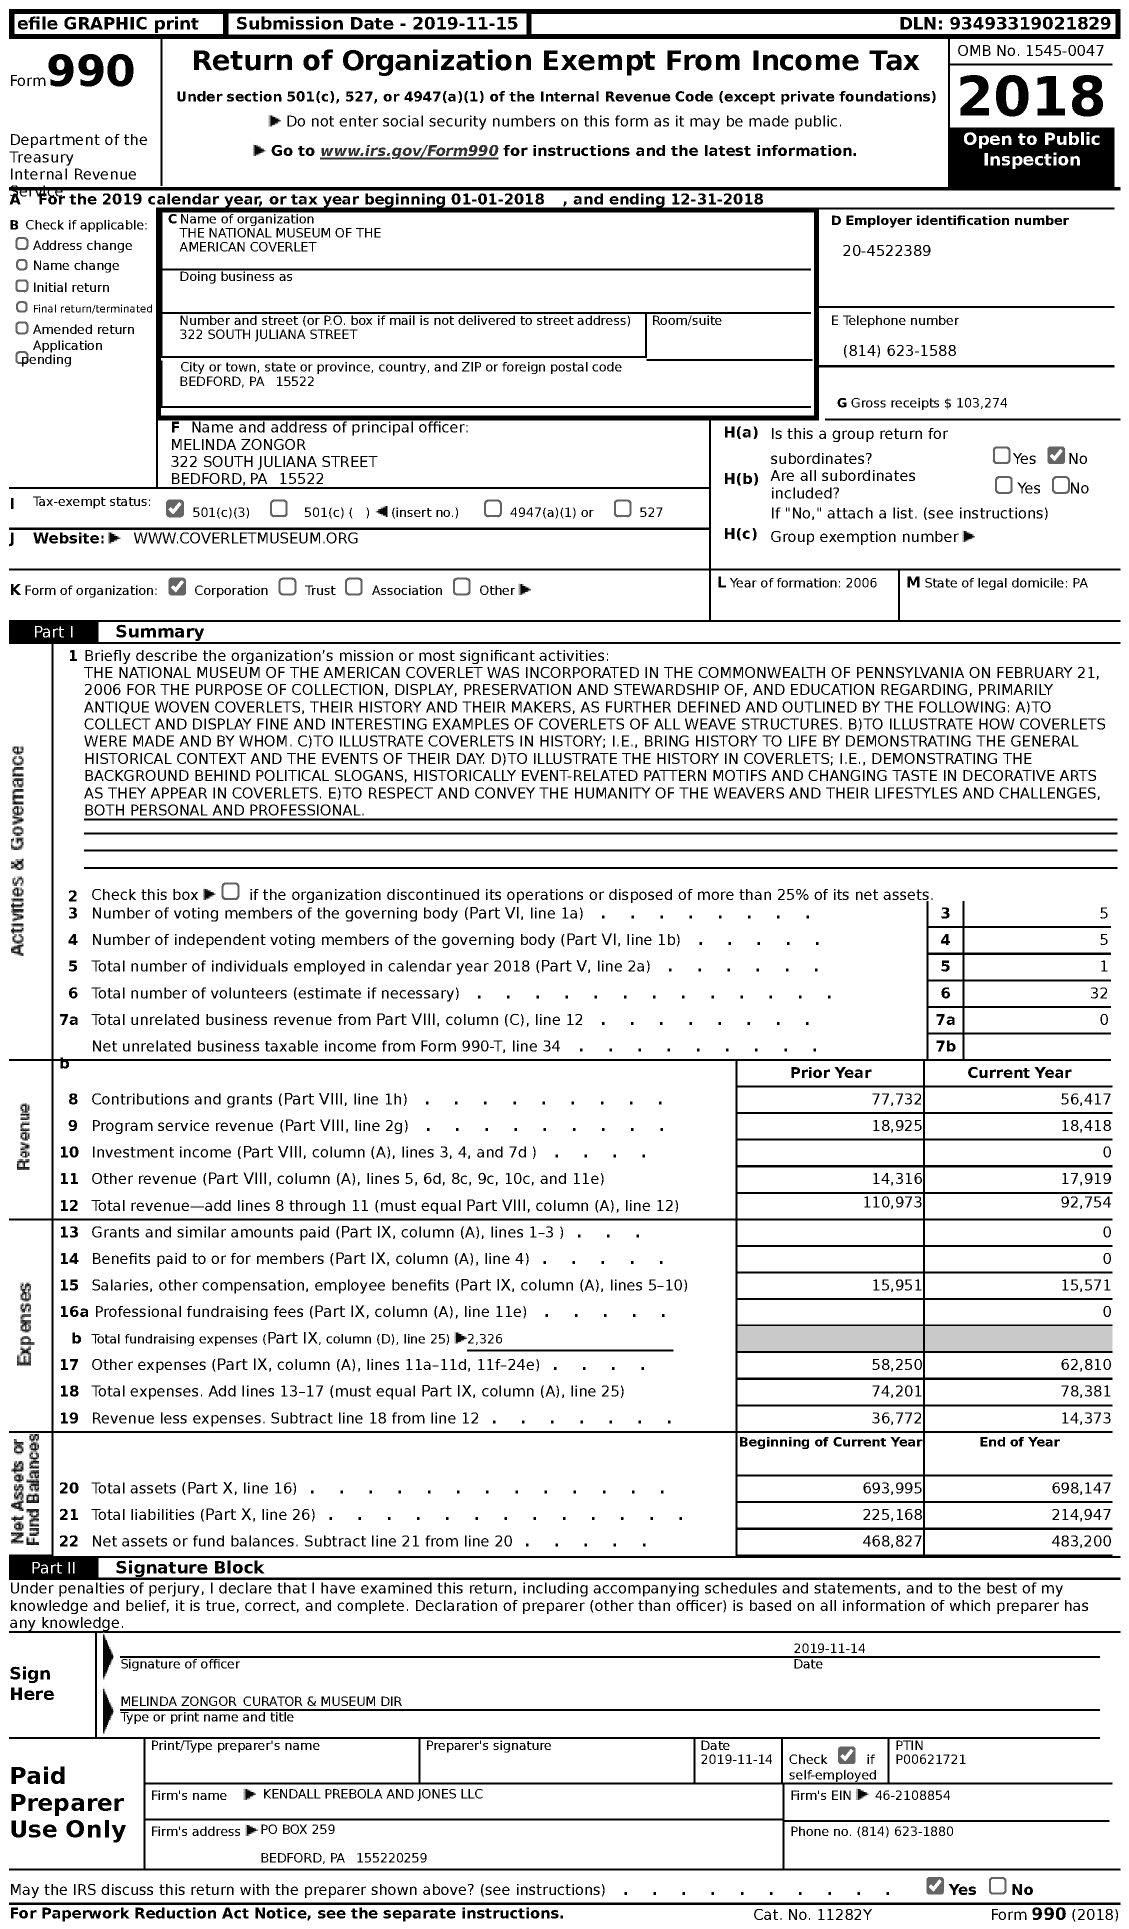 Image of first page of 2018 Form 990 for The National Museum of the American Coverlet